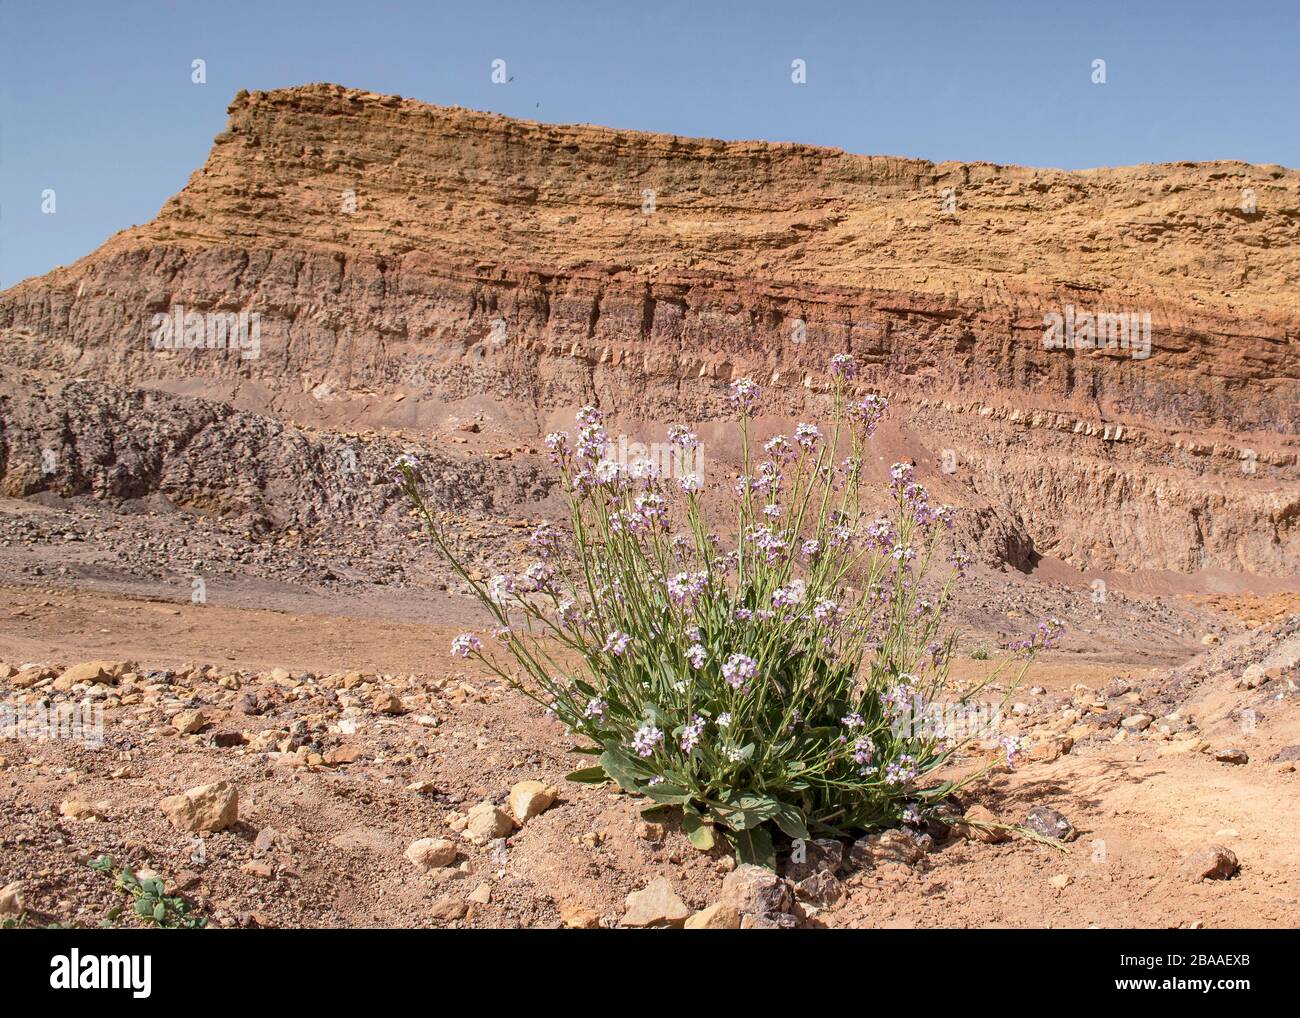 desert rocket diplotaxis acris wildflower blooming in a rehabilitated mining quarry in the makhtesh ramon crater in israel with the colorful soil laye Stock Photo